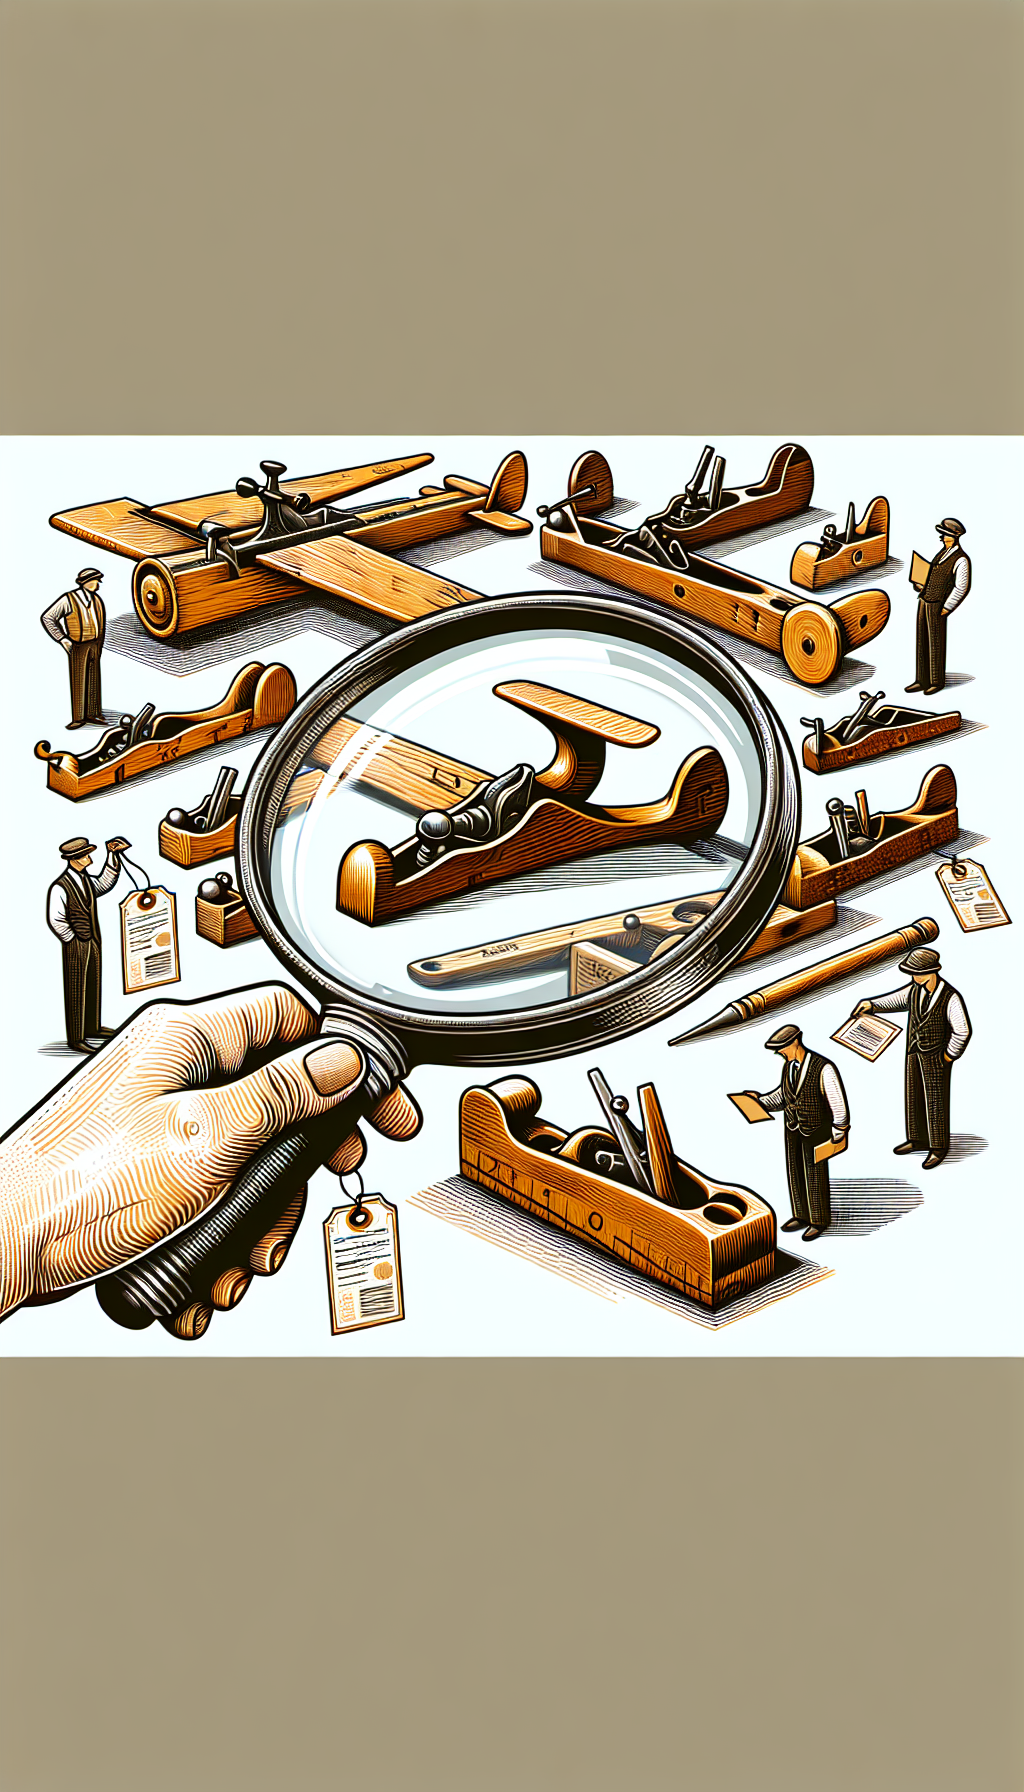 A whimsical illustration showcases a magnifying glass peering over a selection of antique wood planes, each casting a unique shadow revealing their era and maker's mark. Beneath the magnifying glass, tiny figures of expert collectors hold up price tags and authentication certificates, highlighting the planes' values and authenticity, with styles ranging from intricate line art to bold, vintage-colored blocks.